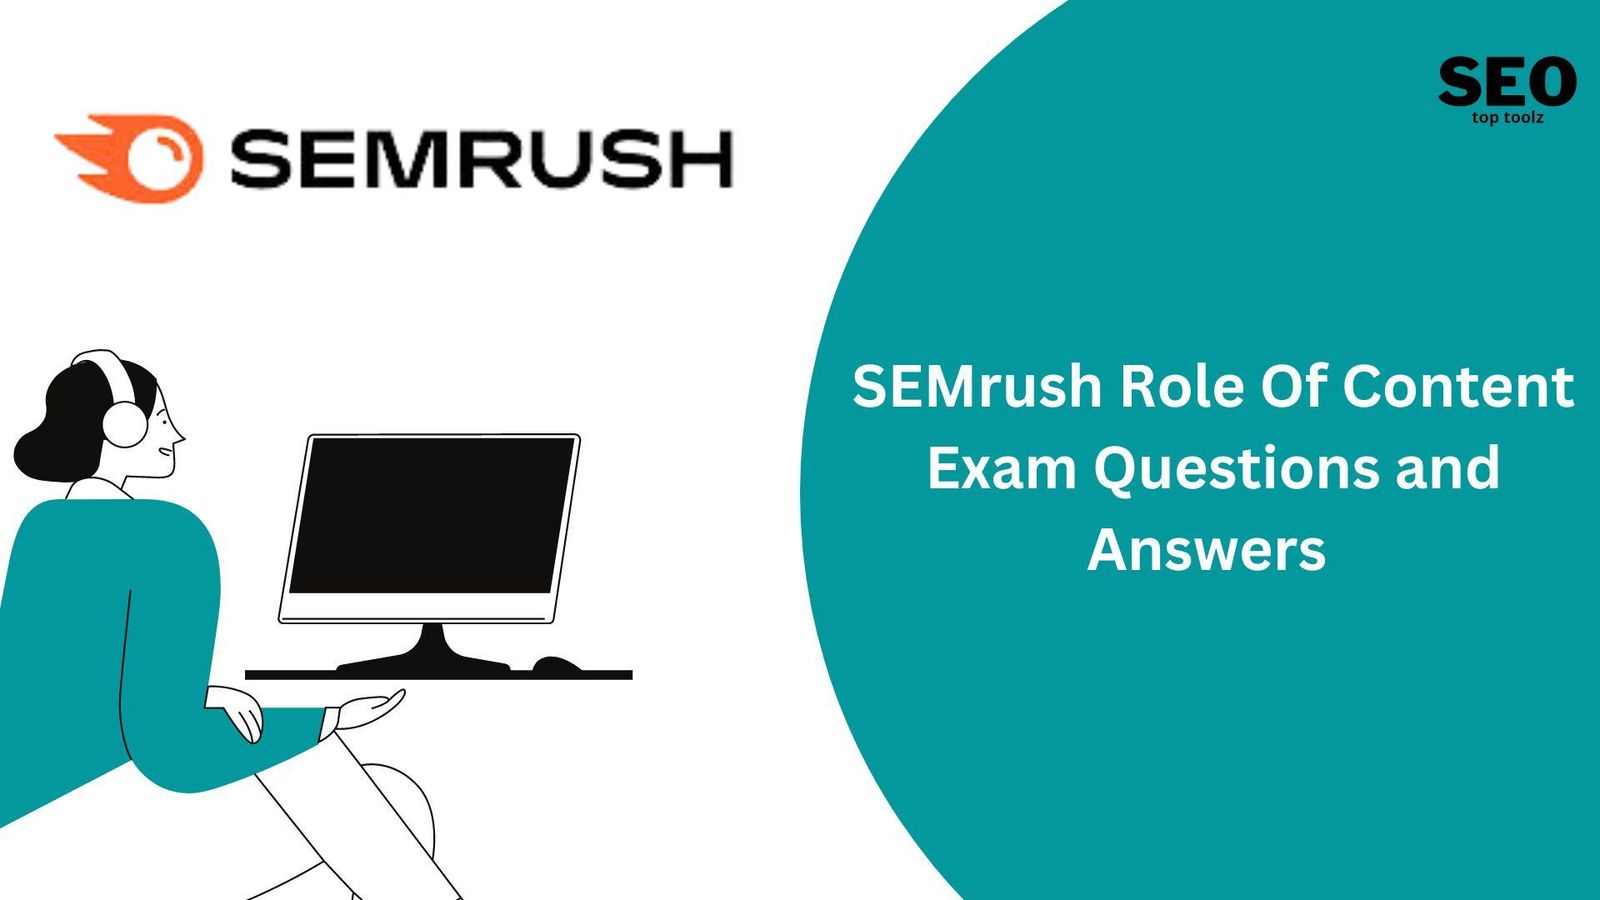 100% correct answers and covered every possible question of the exam for free., amazon ates training center in kolkata, amazon product certification requirements, amazon seller university certification, choose 2 correct statements about the featured snippets report in the position tracking tool, competitive analysis and keyword research test answers, competitor analysis with semrush exam answers, connecting ga with seo dashboard we get traffic data based on, content marketing and seo fundamentals exam answers, digital garage answers 2022, digital marketing certification exam, digital marketing for smbs certification answers, digital marketing professional certification answers, EMrush Local SEO Exam Answers, for local seo citations are, fundamentals of digital marketing final exam answers 2022, google ads certification answers 2022, google ads display assessment answers 2022, google ads display certification answers 2022, google ads search assessment answers 2022, google ads search certification answers, google analytics certification answers 2022, google analytics individual qualification exam answers 2022, google digital garage answers, google digital garage final exam answers 2022, google digital marketing answers 2022, google digital marketing course answers, google digital marketing final exam answers 2022, google digital marketing garage certification final exam answers 2022, google digital unlocked answers, Google Exam Answers, google fundamentals of digital marketing answers 2022, google garage digital marketing answers 2022, how do you know if you need local seo, how to do keyword research semrush, how to do local seo marketing, how to get amazon seller certificate, how to use semrush for seo, Hubspot Inbound Marketing Certification Exam Answers 2022, local seo exam, mobile seo exam answers in hindi, name the solid local link building strategy, on page and technical seo test answers, online certificate exam, SEMrush, SEMrush Advanced Competitive Research, SEMrush Advanced Competitive Research Certification Answers, SEMrush Advanced Competitive Research Certification Exam Answers 2022, SEMrush Advertising Toolkit Test, semrush amazon, SEMrush Backlink Management Exam Answers 2022, SEMrush Backlink Management Exam Answers 2022 - SEMrush Backlink Management Certification Test Answers 20212, semrush certification, SEMrush Competitive Analysis, semrush competitive analysis and keyword research test answers, semrush digital marketing certification, semrush exam answers, SEMrush Keyword Research, SEMrush Keyword Research Certification Answers 2022, SEMrush Link Building Test Answers, SEMrush Link Building Test Answers 2022, SEMrush Local SEO Certification Exam Answers 2022, semrush local seo exam, semrush local seo exam answers, SEMrush Management Reporting and Collaboration Exam Answers 2022, SEMrush Mobile SEO Certification Answers 2022, SEMrush Mobile SEO Exam, semrush mobile seo exam answers, SEMrush PPC Fundamentals Exam Answers 2022, SEMrush Rank Tracking, SEMrush Rank Tracking Certification Exam Answers 2022, semrush rank tracking certification exam answers free, semrush rank tracking certification exam answers free download, semrush rank tracking certification exam answers pdf, SEMrush Rank Tracking Test Answers, SEMrush Role of Content, semrush role of content exam answers, Semrush SEO Fundamentals Answers, semrush seo fundamentals exam answers, semrush seo score, semrush seo test, SEMrush SEO Toolkit Answers, semrush site audit exam answers, SEMrush Social Media Toolkit Test, SEMrush Technical SEO, semrush technical seo exam answers, seo exam online, start selling on amazon from pakistan, what is seo semrush